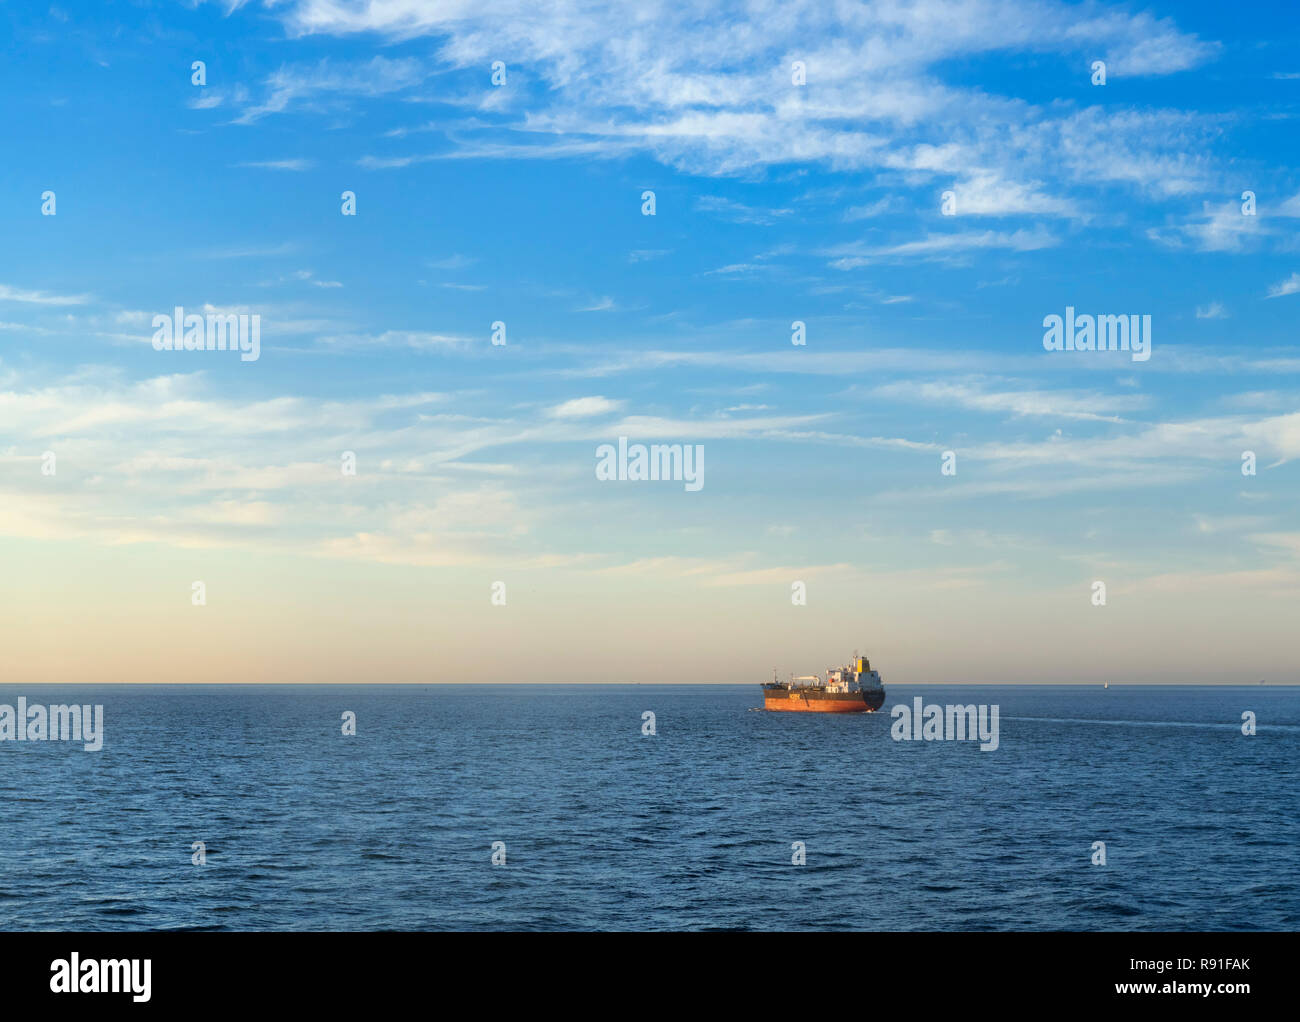 Arctic Breeze chemical / oil tanker on the North Sea, Europe Stock Photo